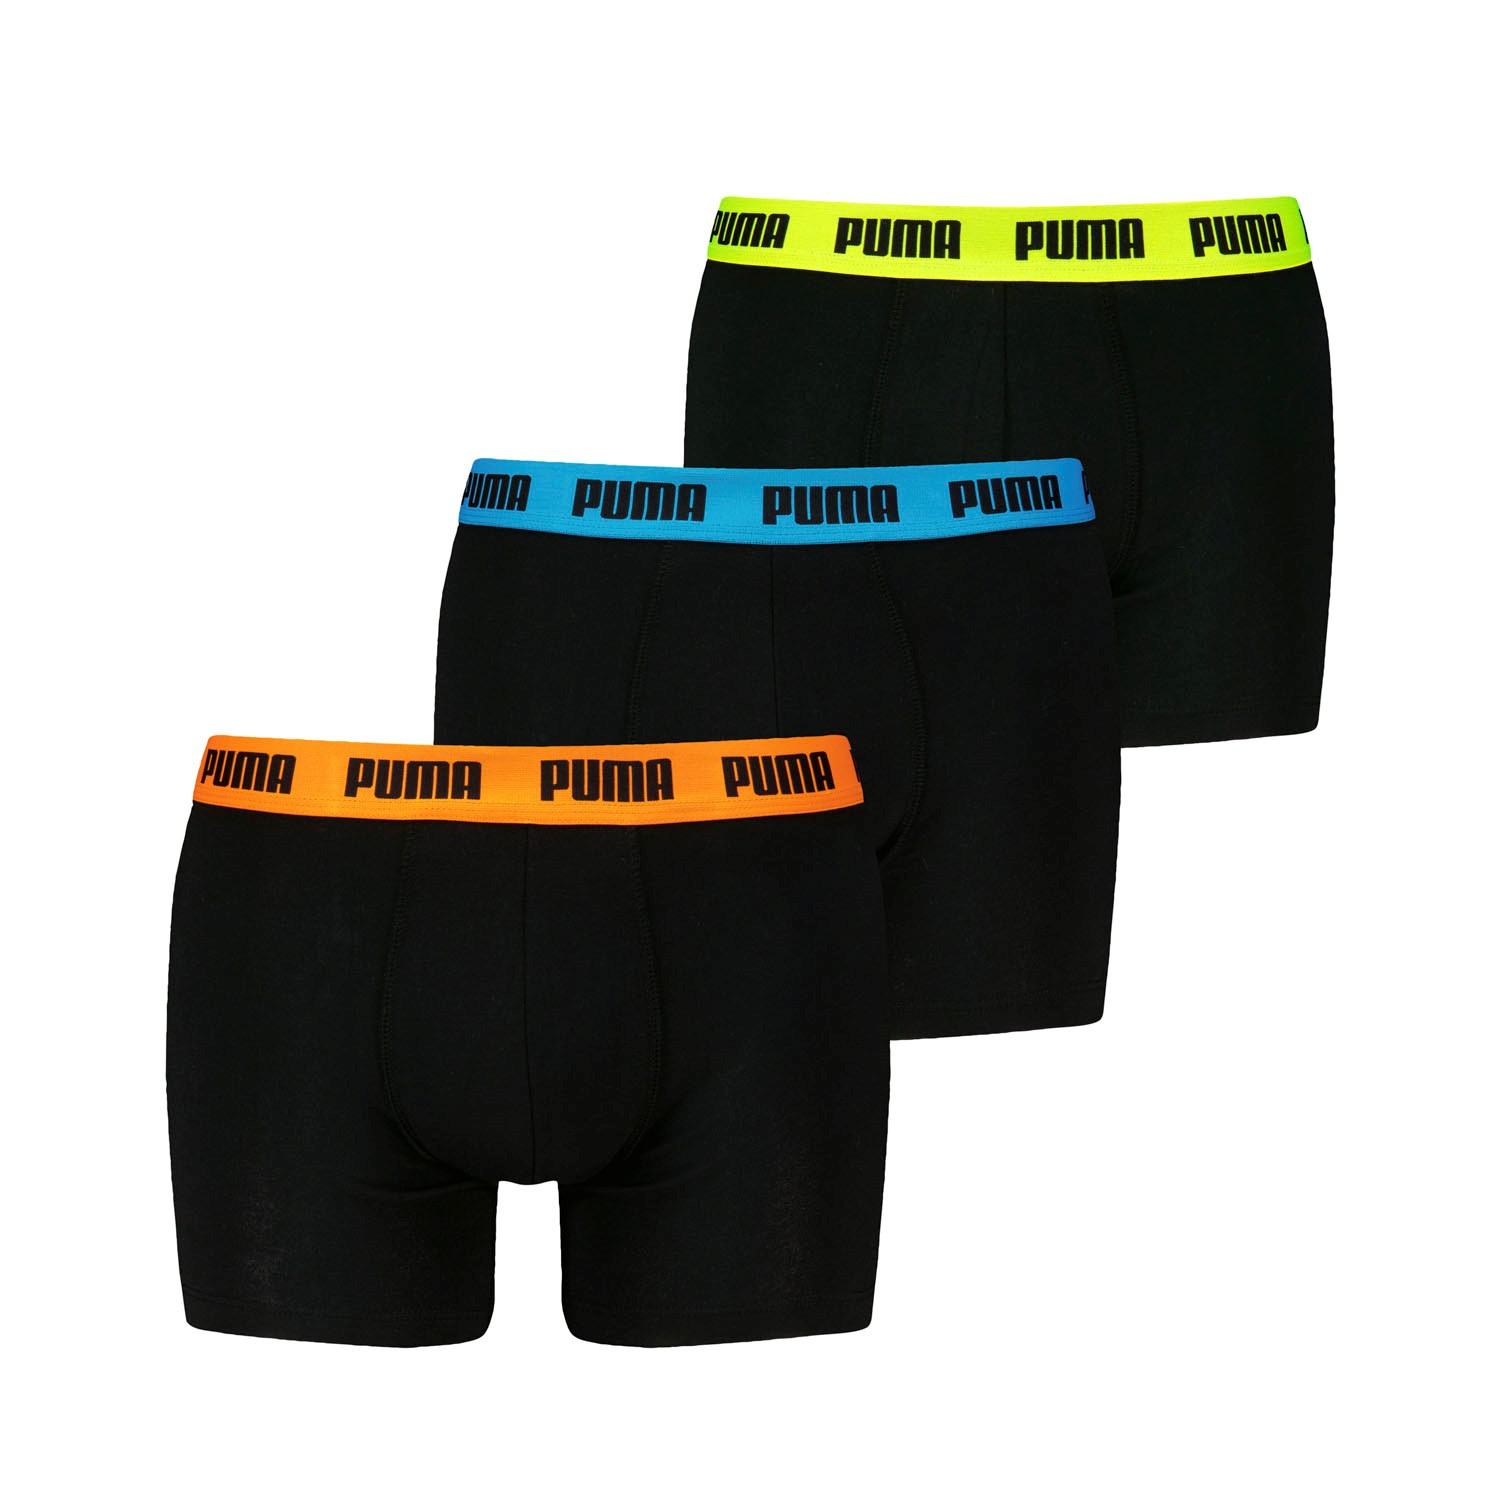 Puma Active Long Boxer - Athletic trunks - Athletic apparel - Sport -  Timarco.co.uk